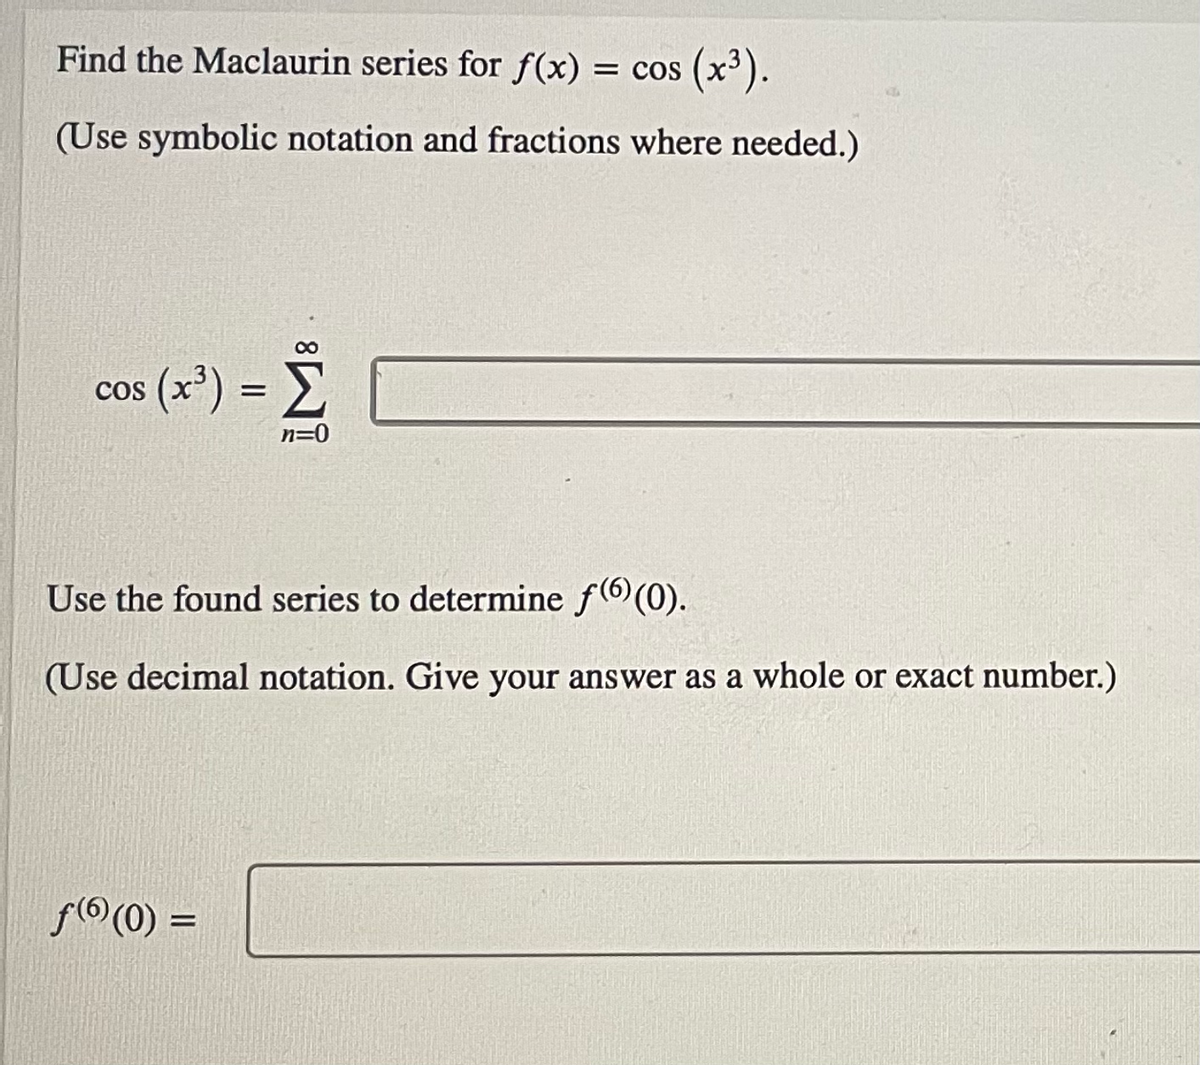 Find the Maclaurin series for f(x)
= cos (x³).
= COS
(Use symbolic notation and fractions where needed.)
cos (x') = E
COS
n=0
Use the found series to determine f(6 (0).
(Use decimal notation. Give your answer as a whole or exact number.)
f(6 (0) :
